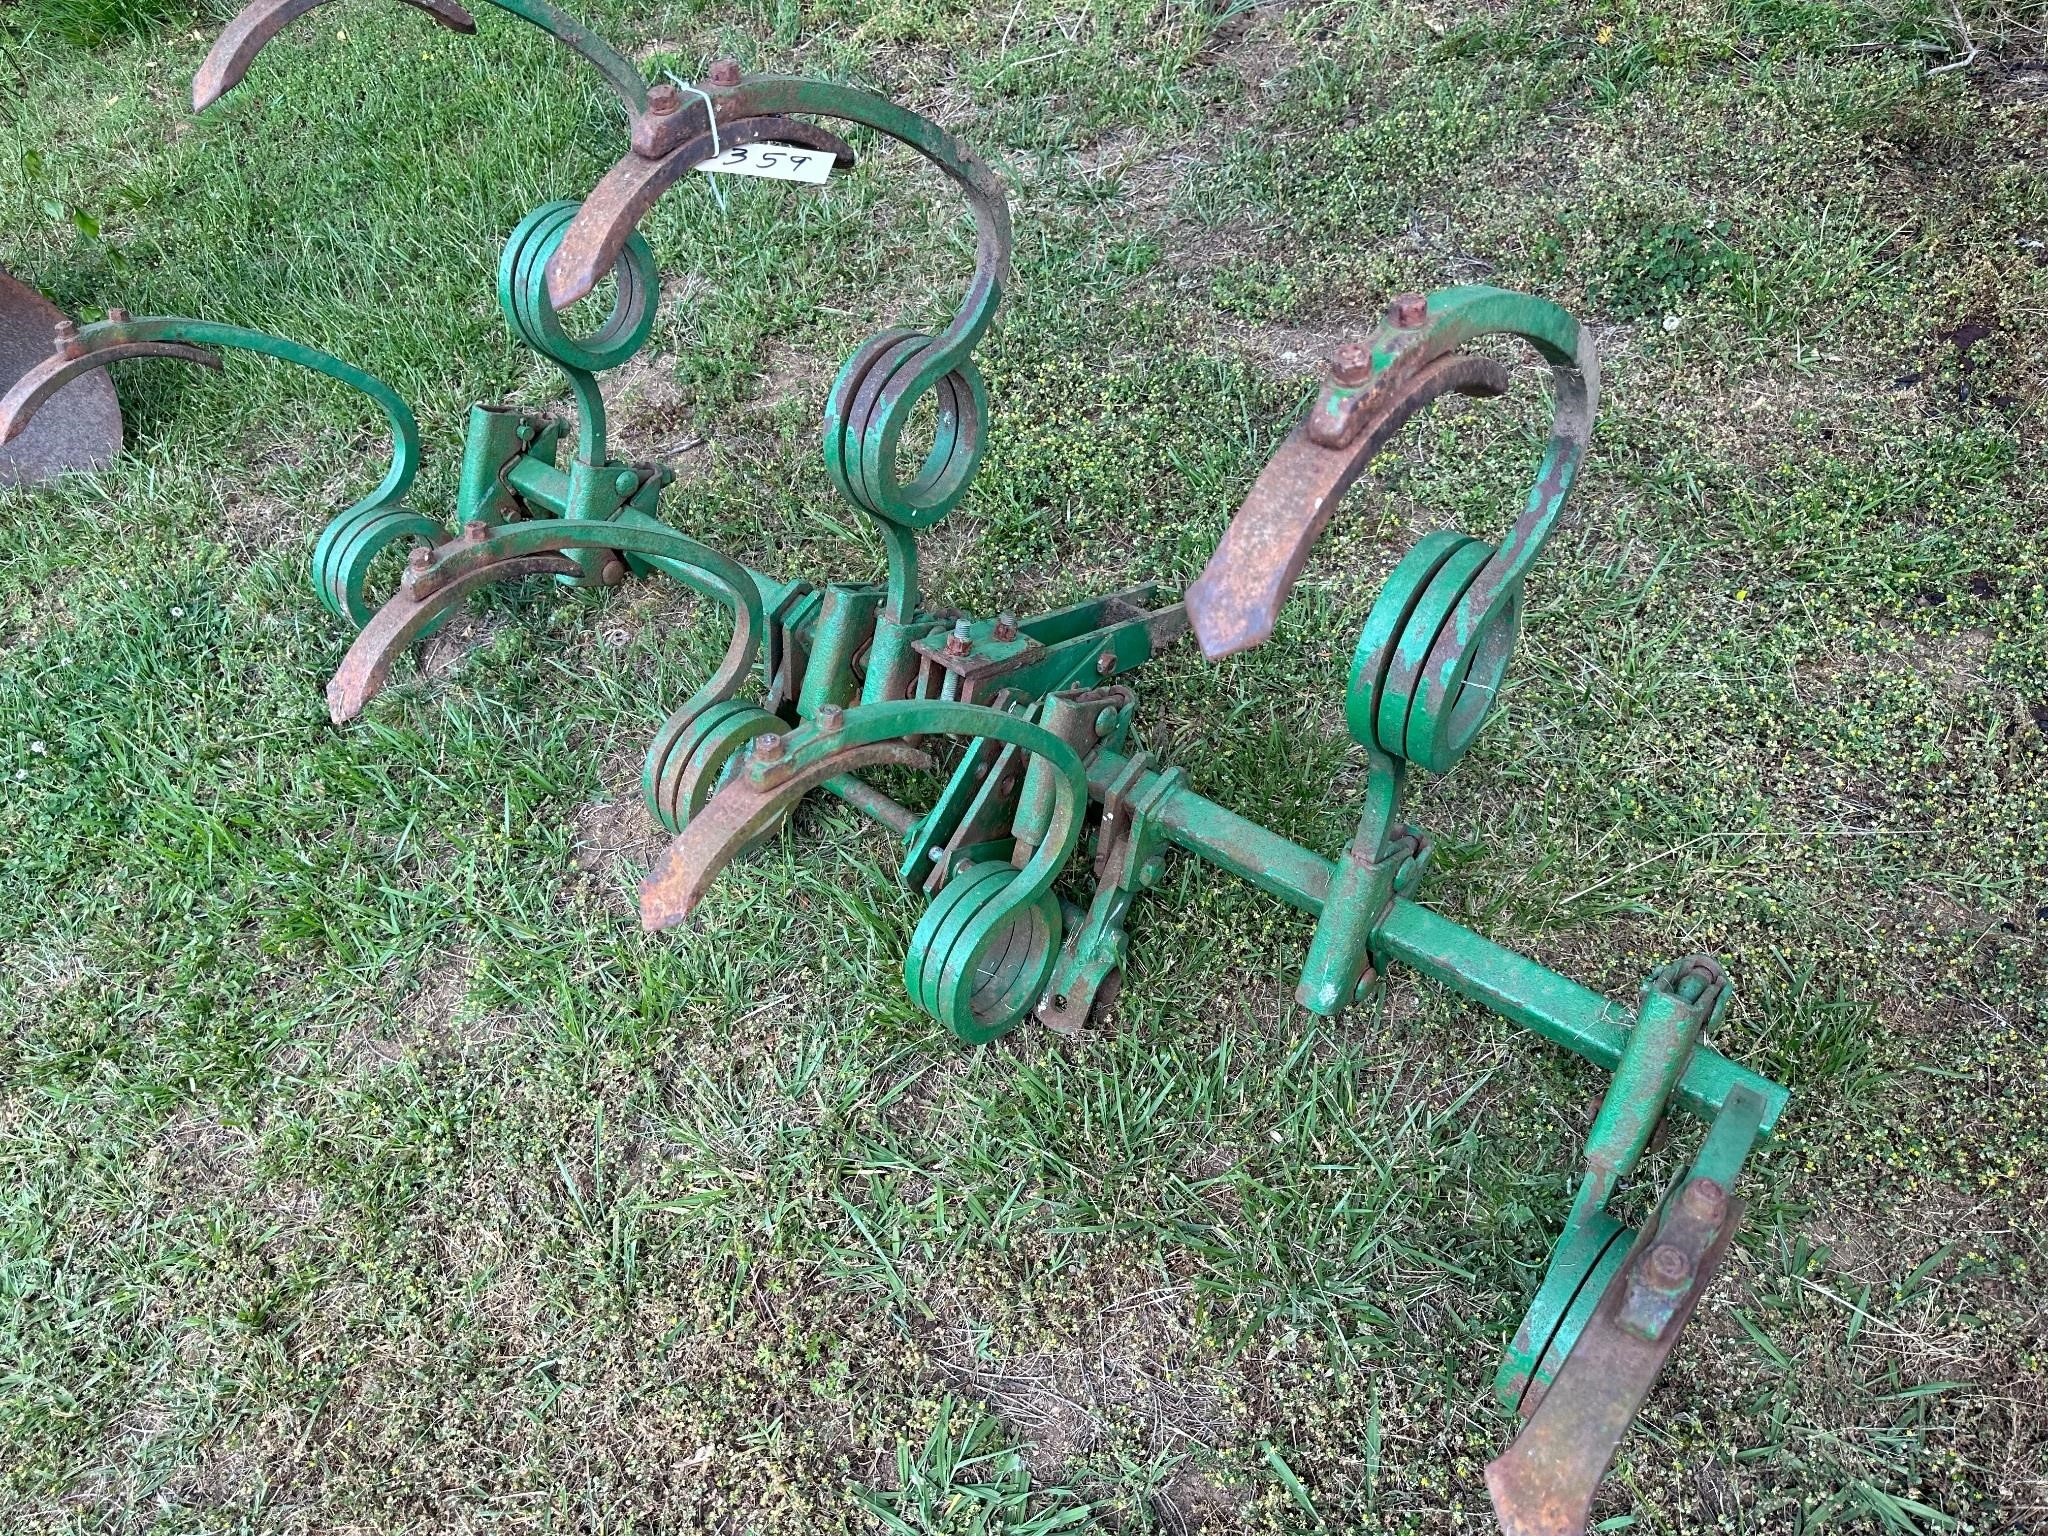 Spring tooth cultivator